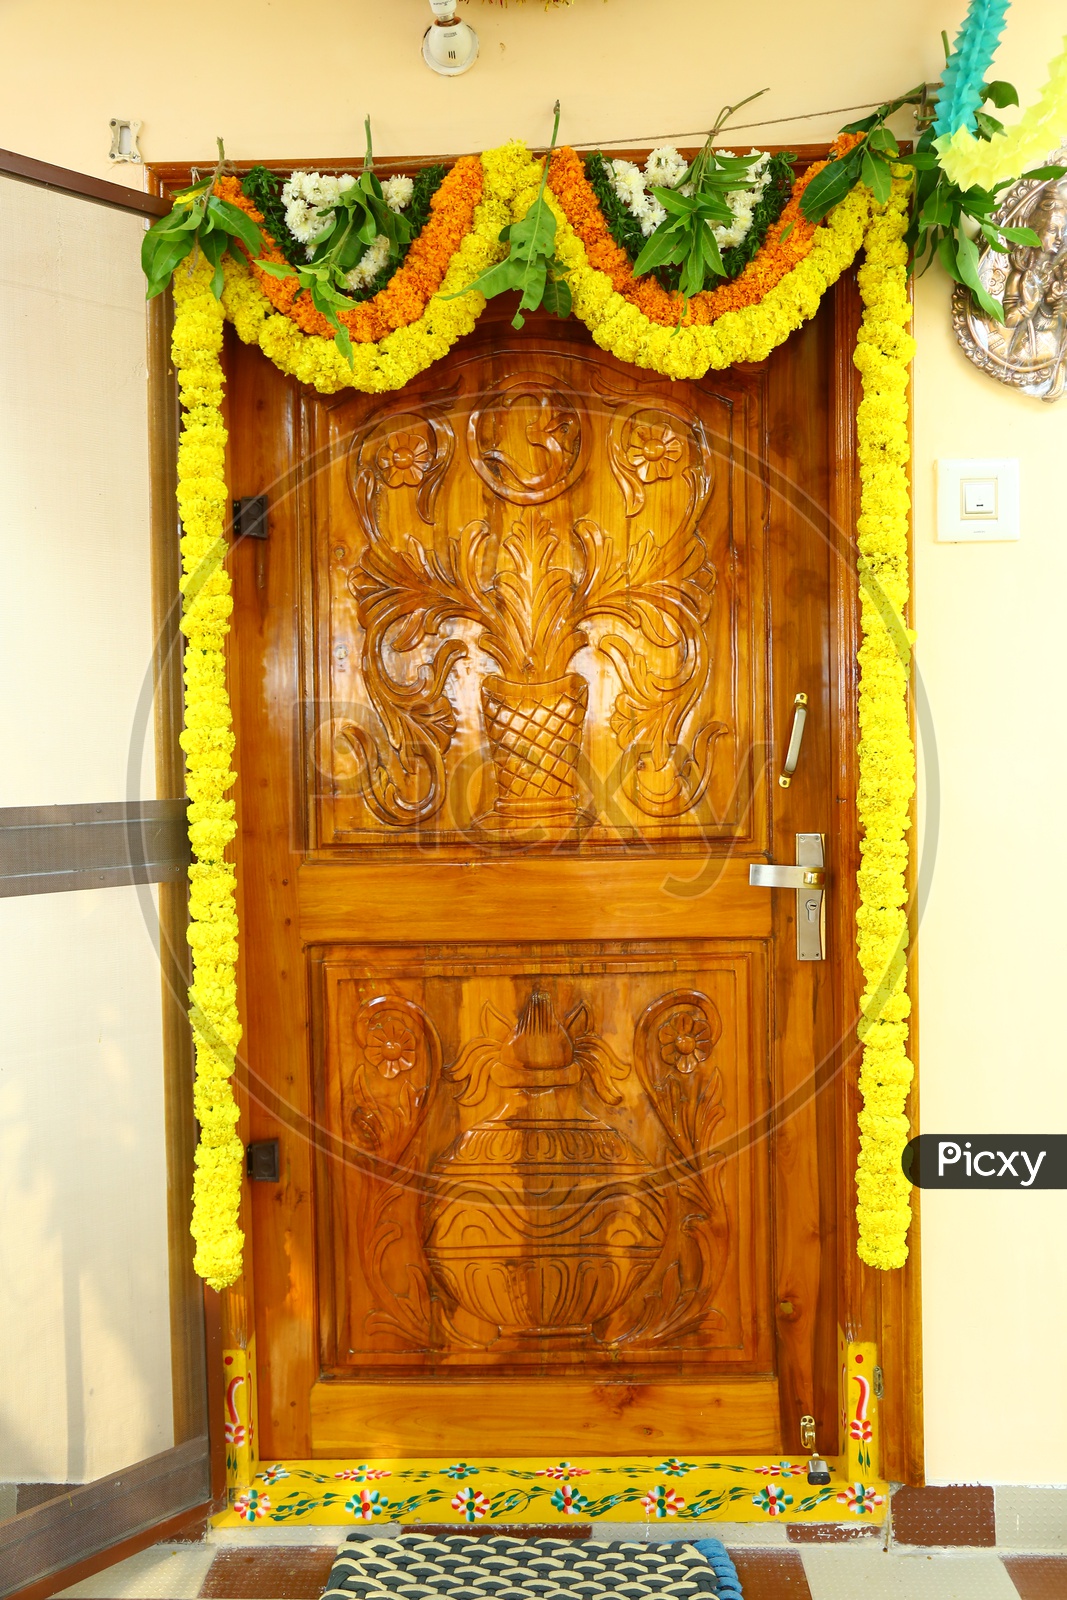 A wooden door decorated with garlands